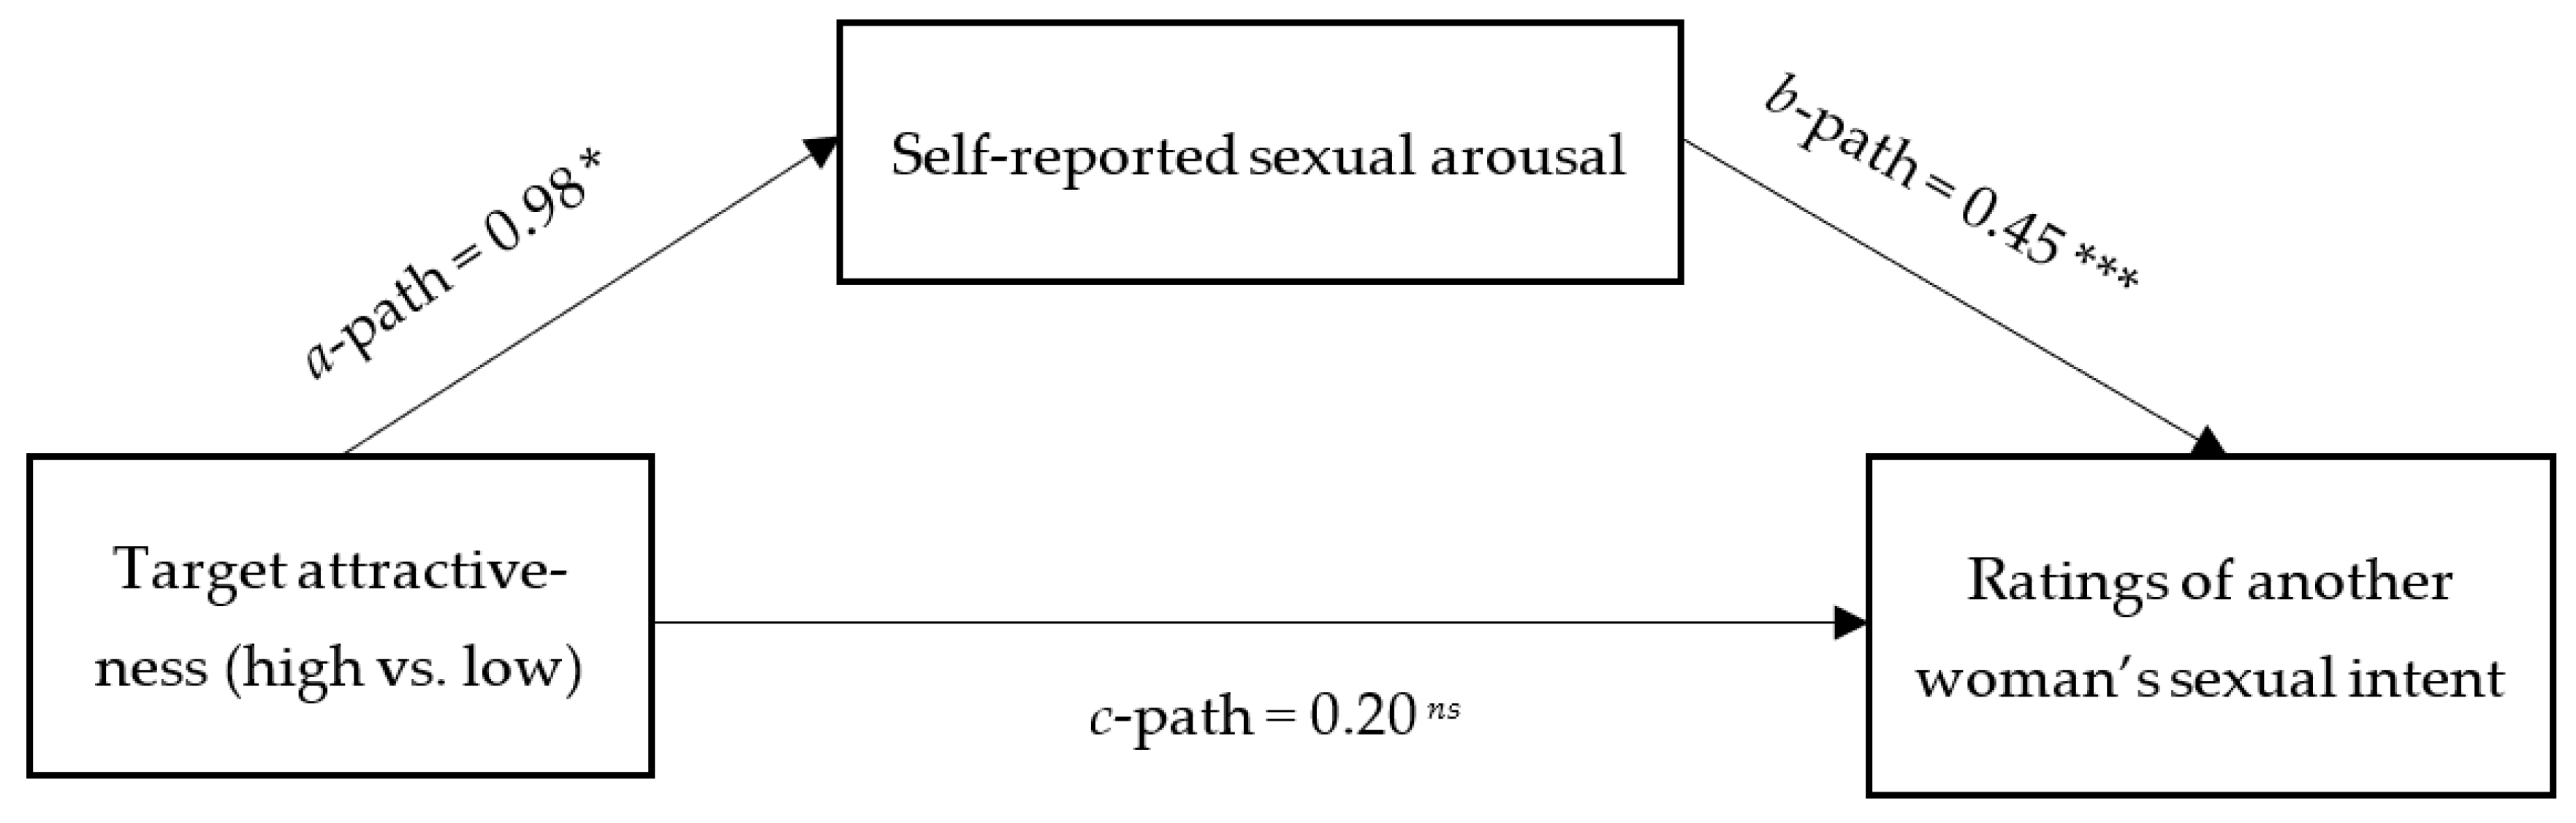 Sexes Free Full-Text Menandrsquo;s Physical Attractiveness Predicts Womenandrsquo;s Ratings of Sexual Intent through Sexual Arousal Implications for Sexual (Mis)Communication